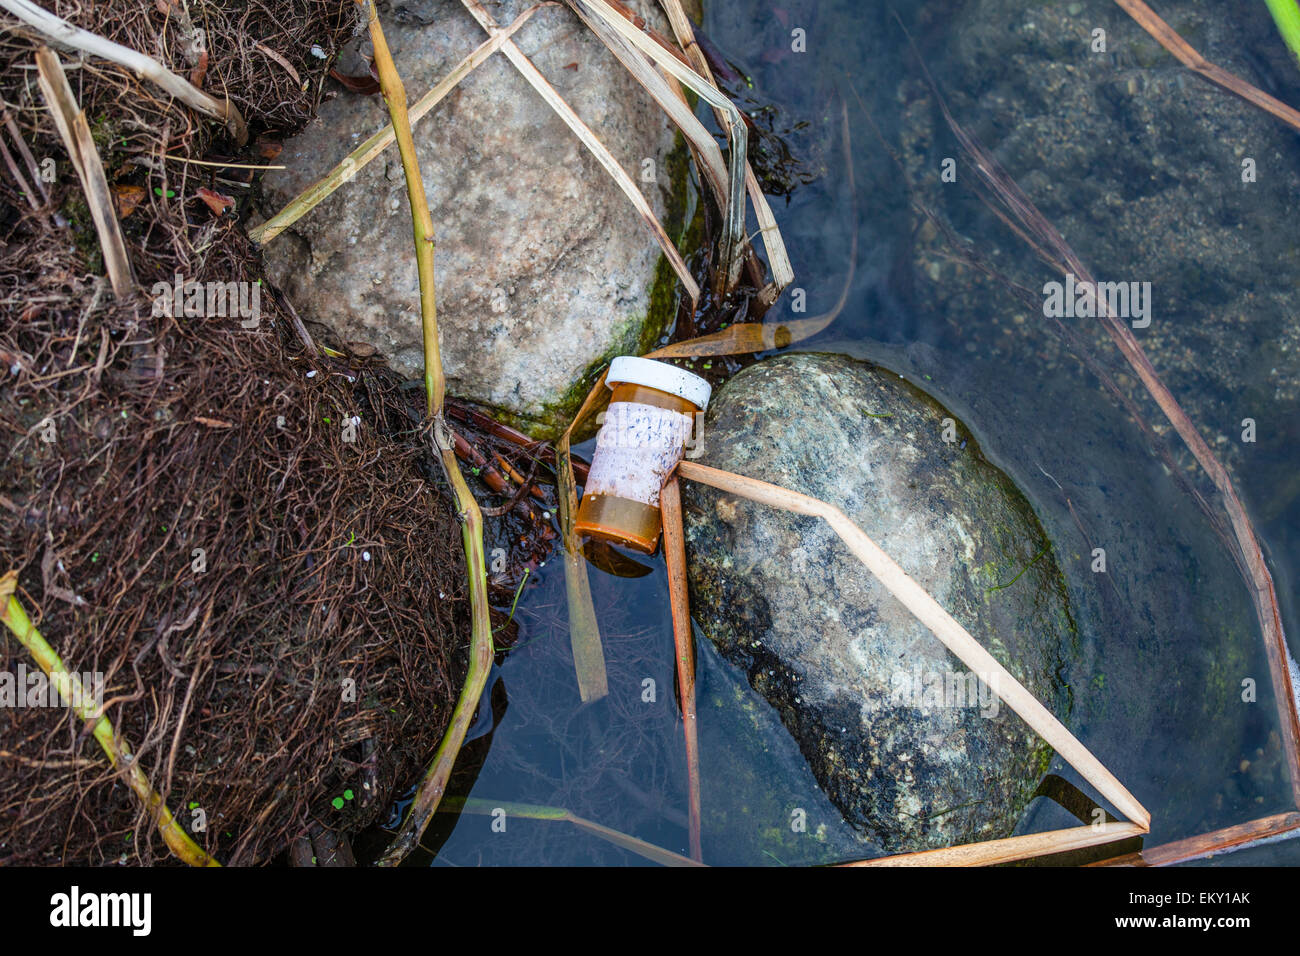 A discarded perscription bottle in the Los Angeles River after the first rain of the season, Glendale Narrows, Los Angeles, CA Stock Photo